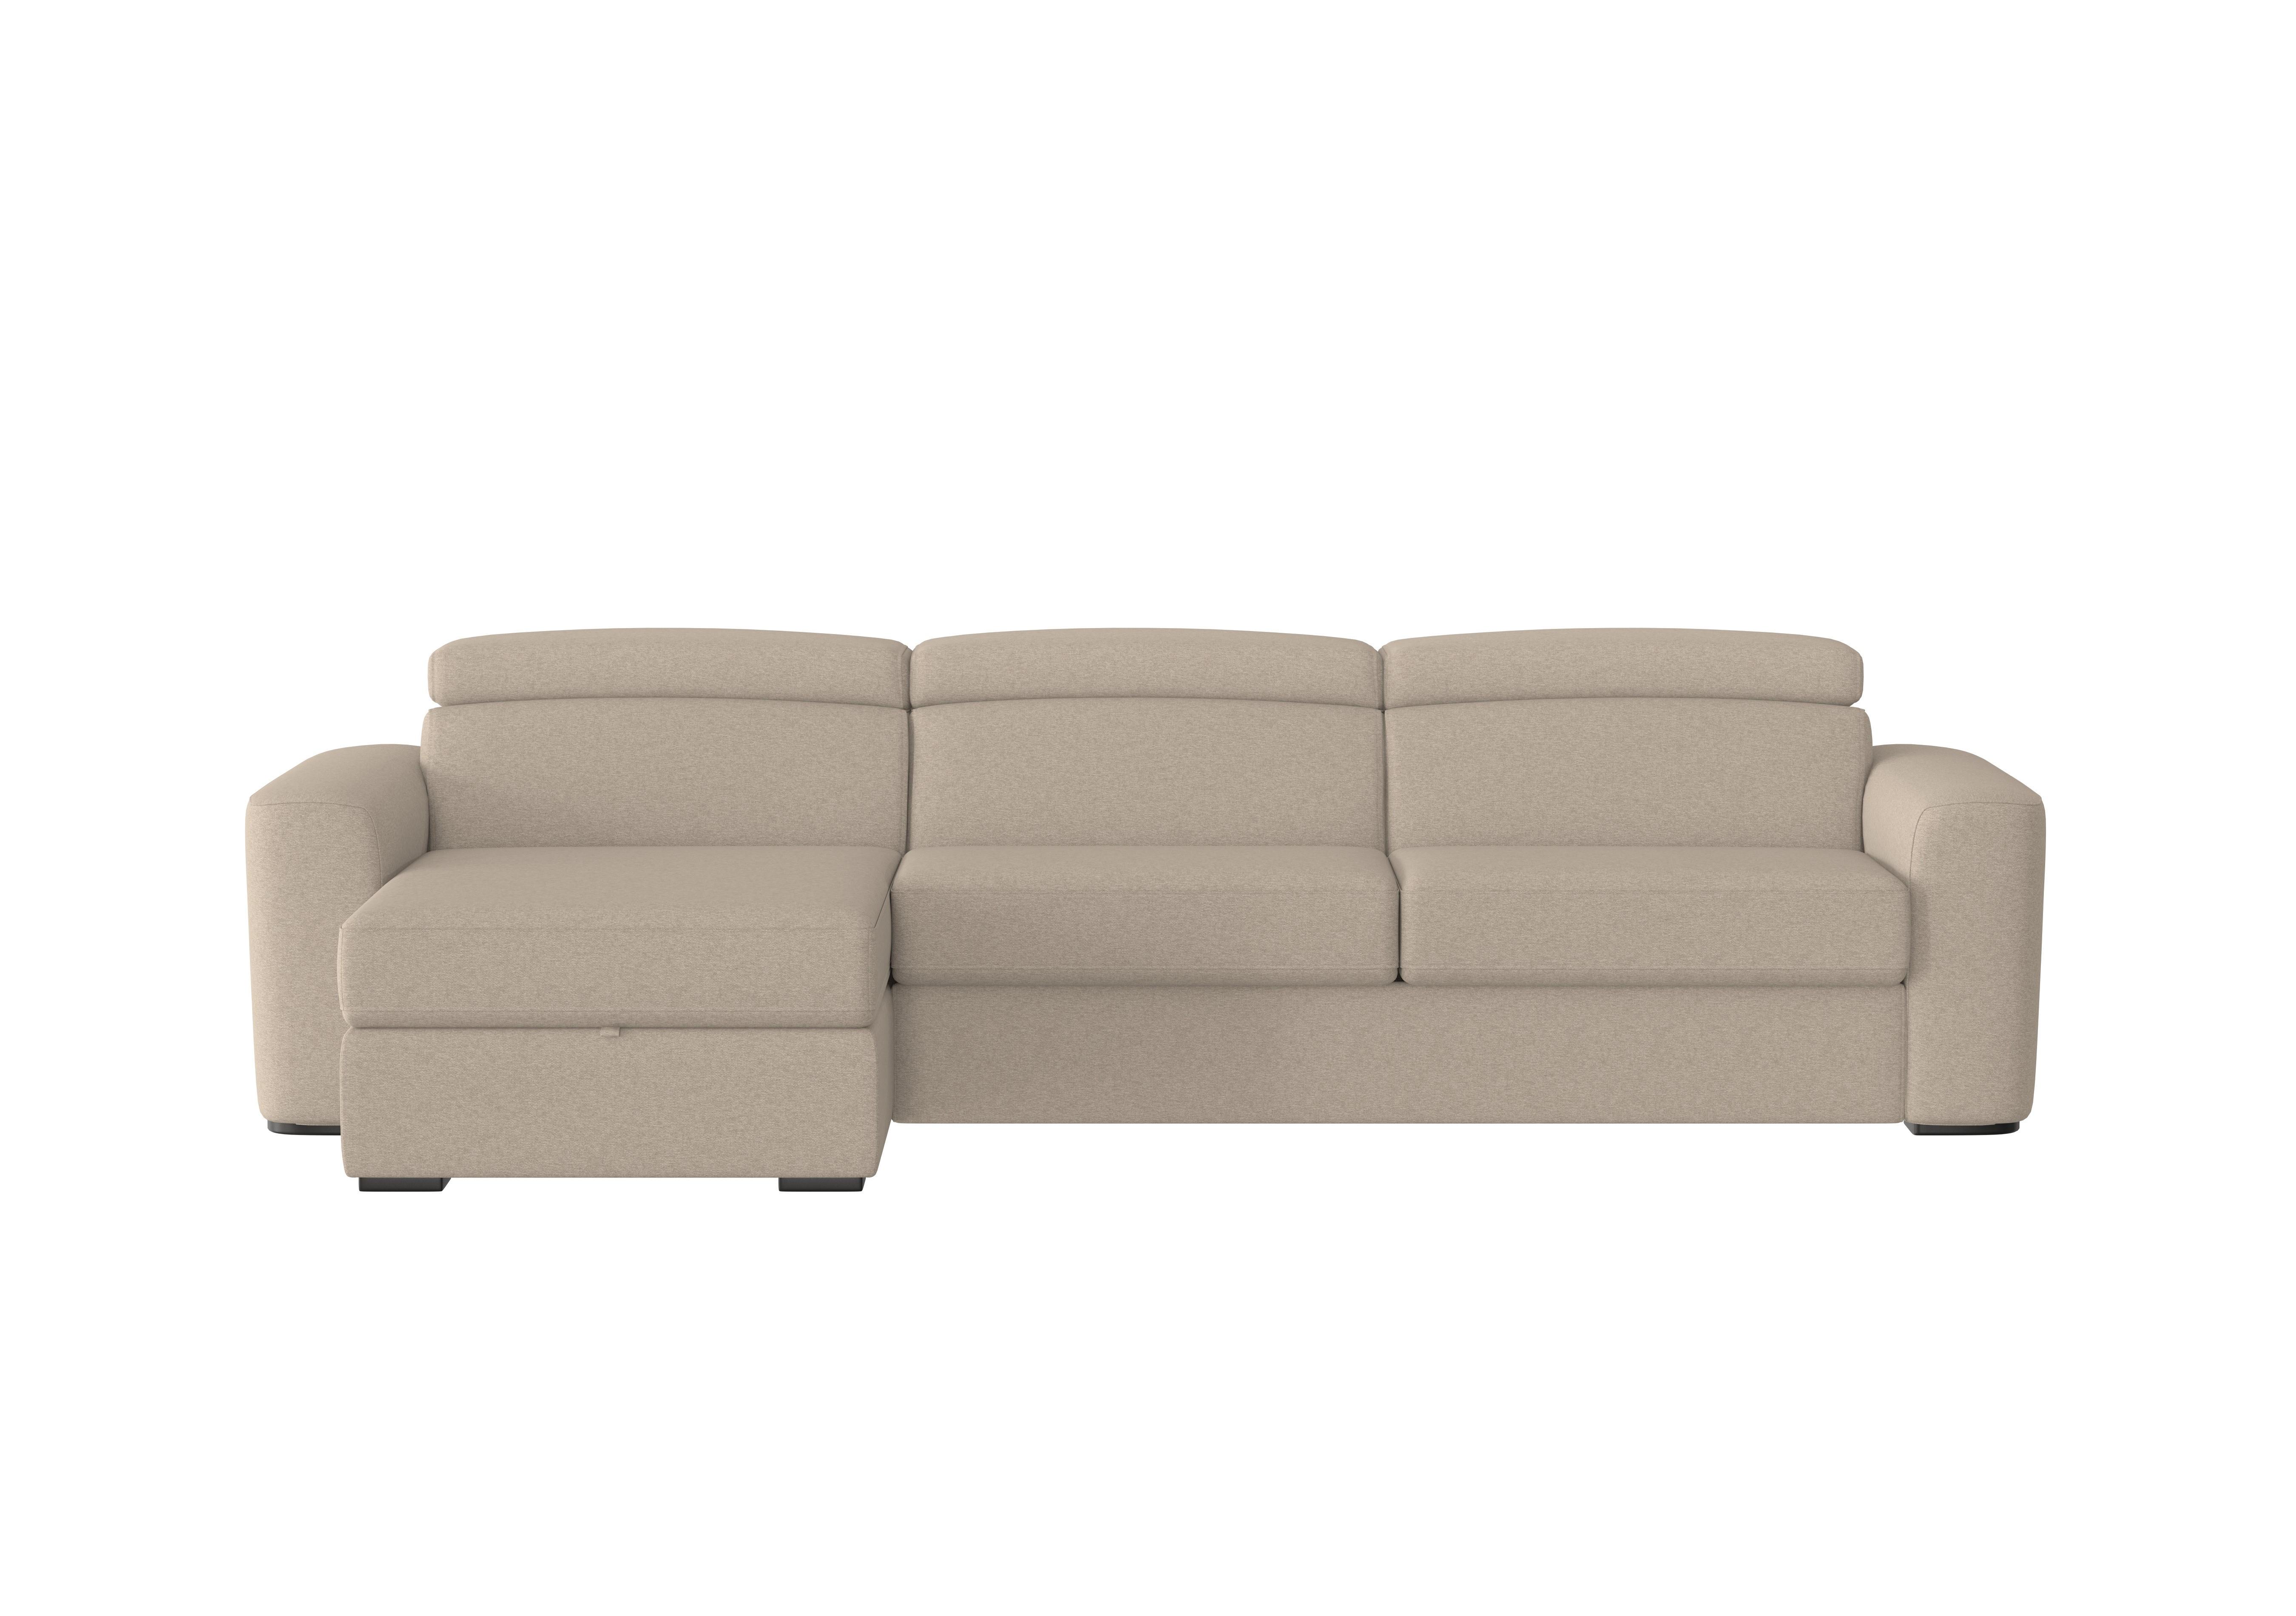 Infinity Fabric Corner Chaise Sofa with Storage in Fab-Ska-R28 Beige on Furniture Village